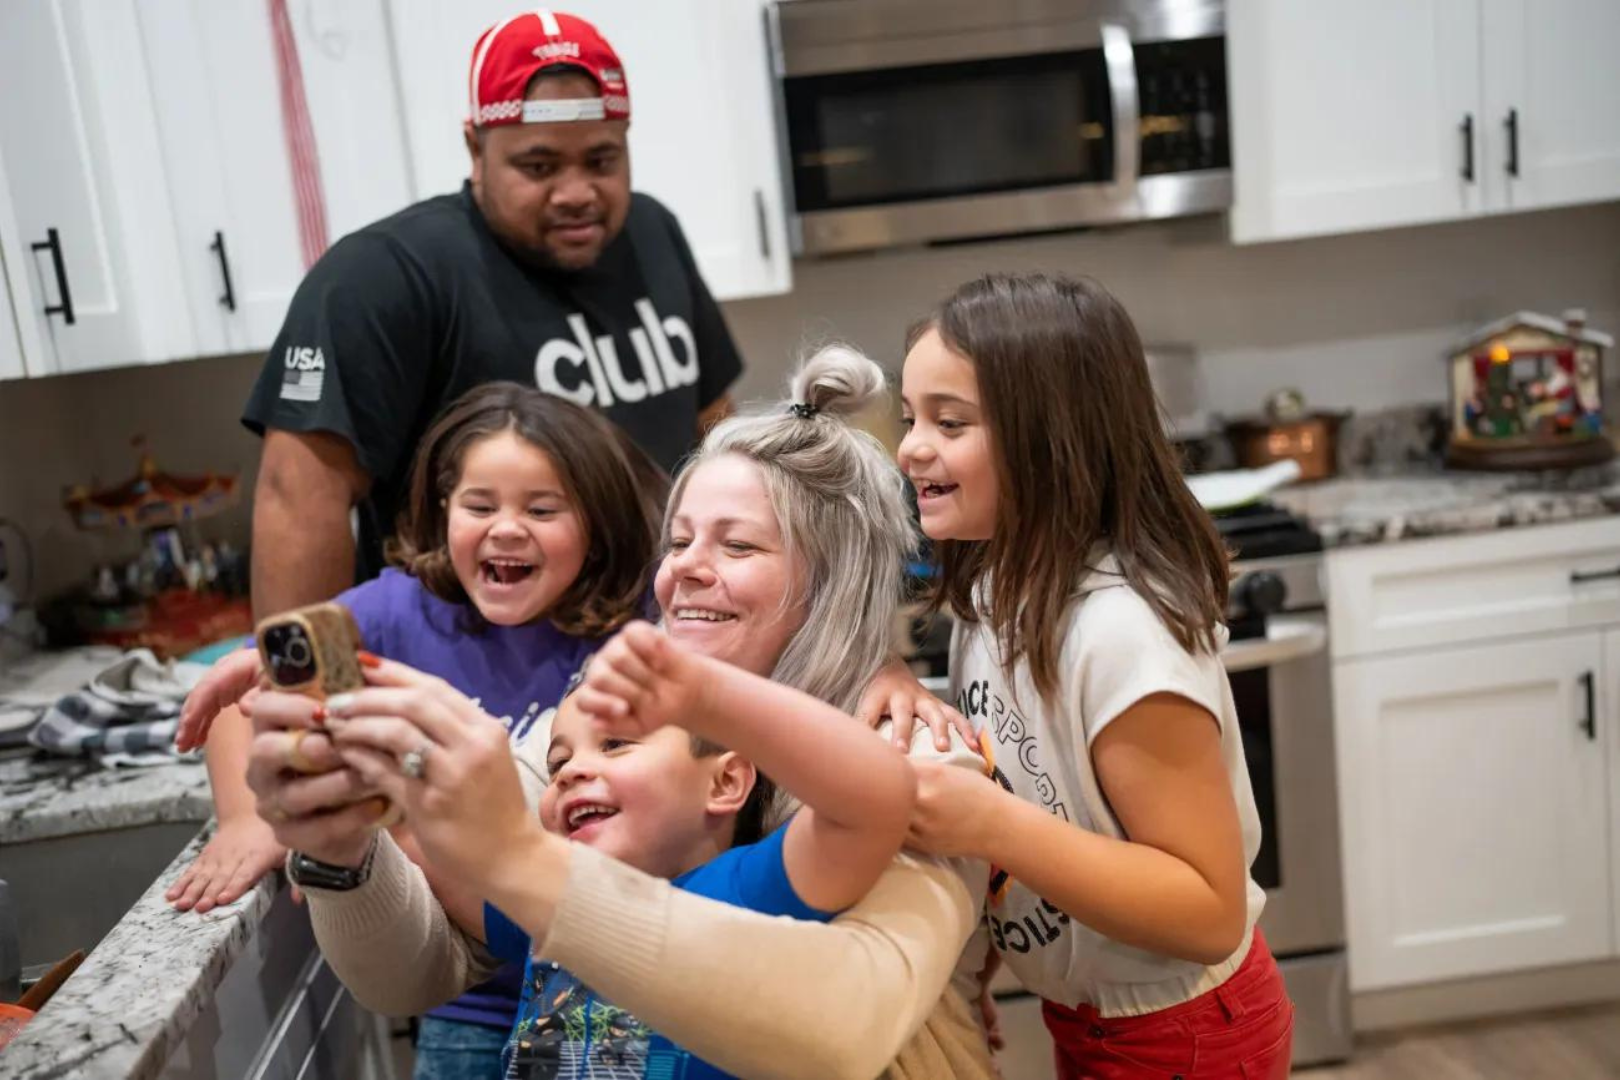 Maka Palu, back, looks on as his wife, Jessica Palu, and three of their children, Lini, 5; Bubba, 4; and Fine, 7, look at a video on her phone at their home in Eagle Mountain on Tuesday, Nov. 28, 2023.